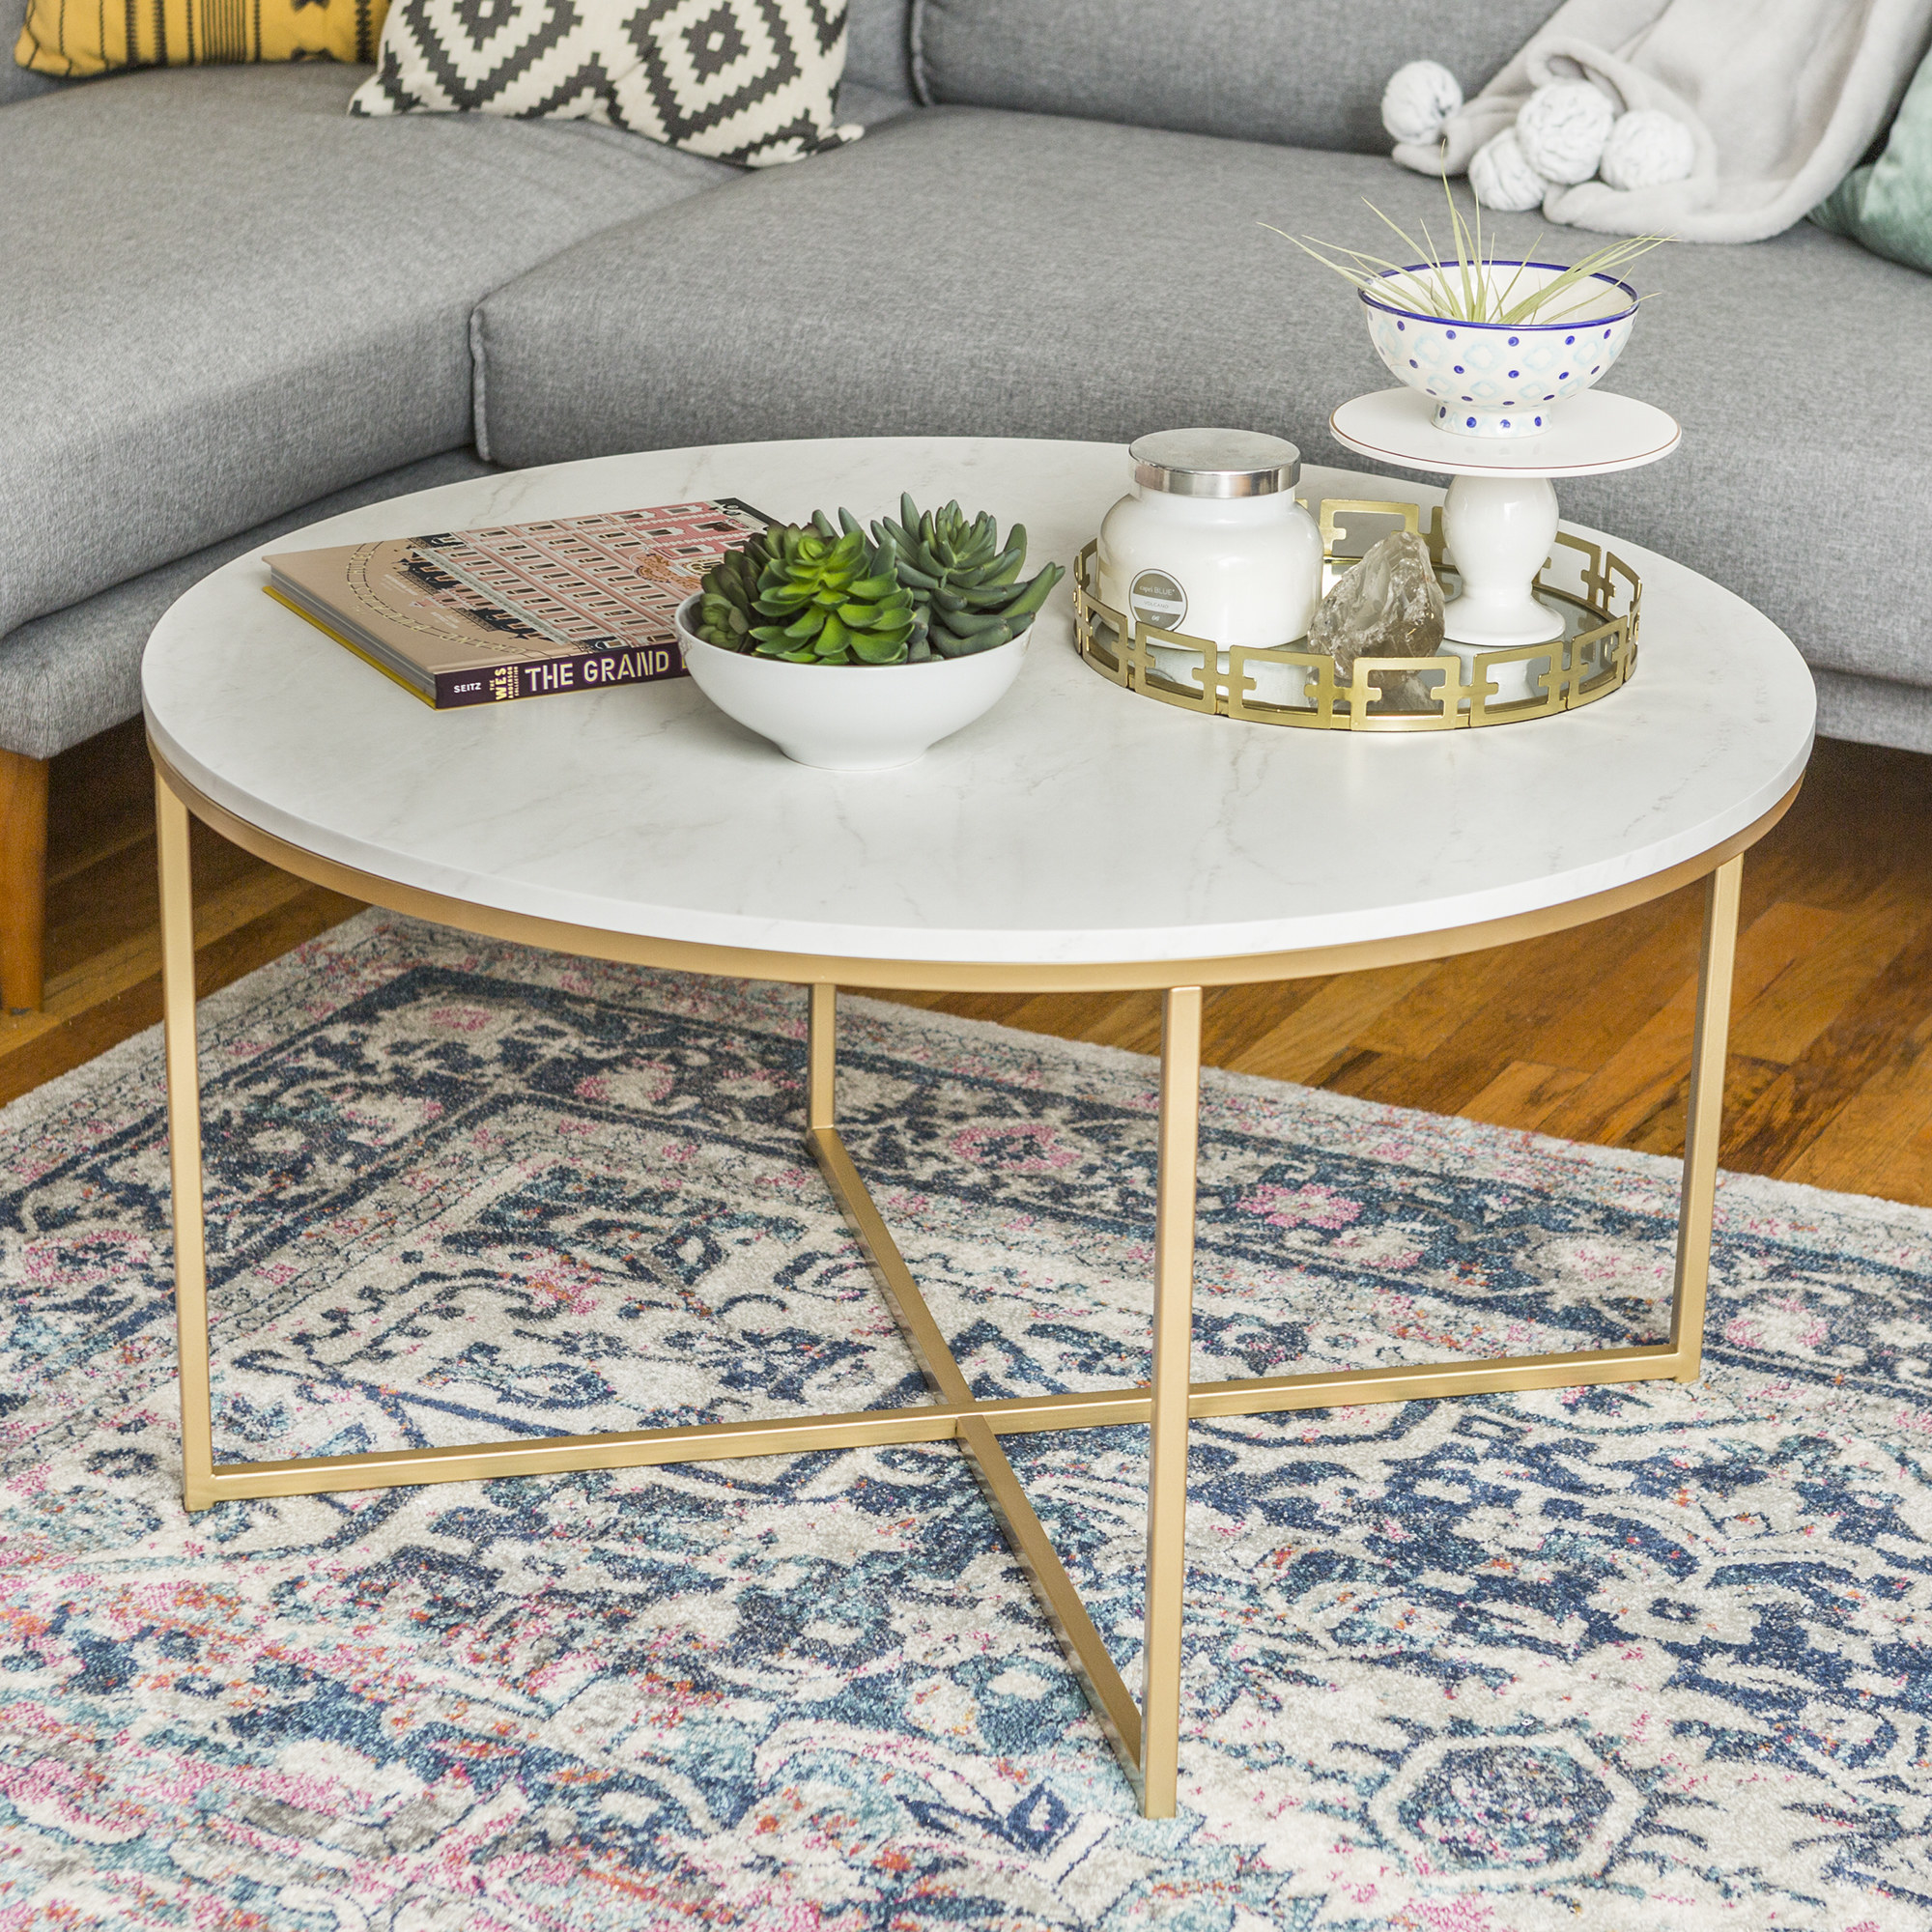 The coffee table, featuring a faux marble top and gold legs